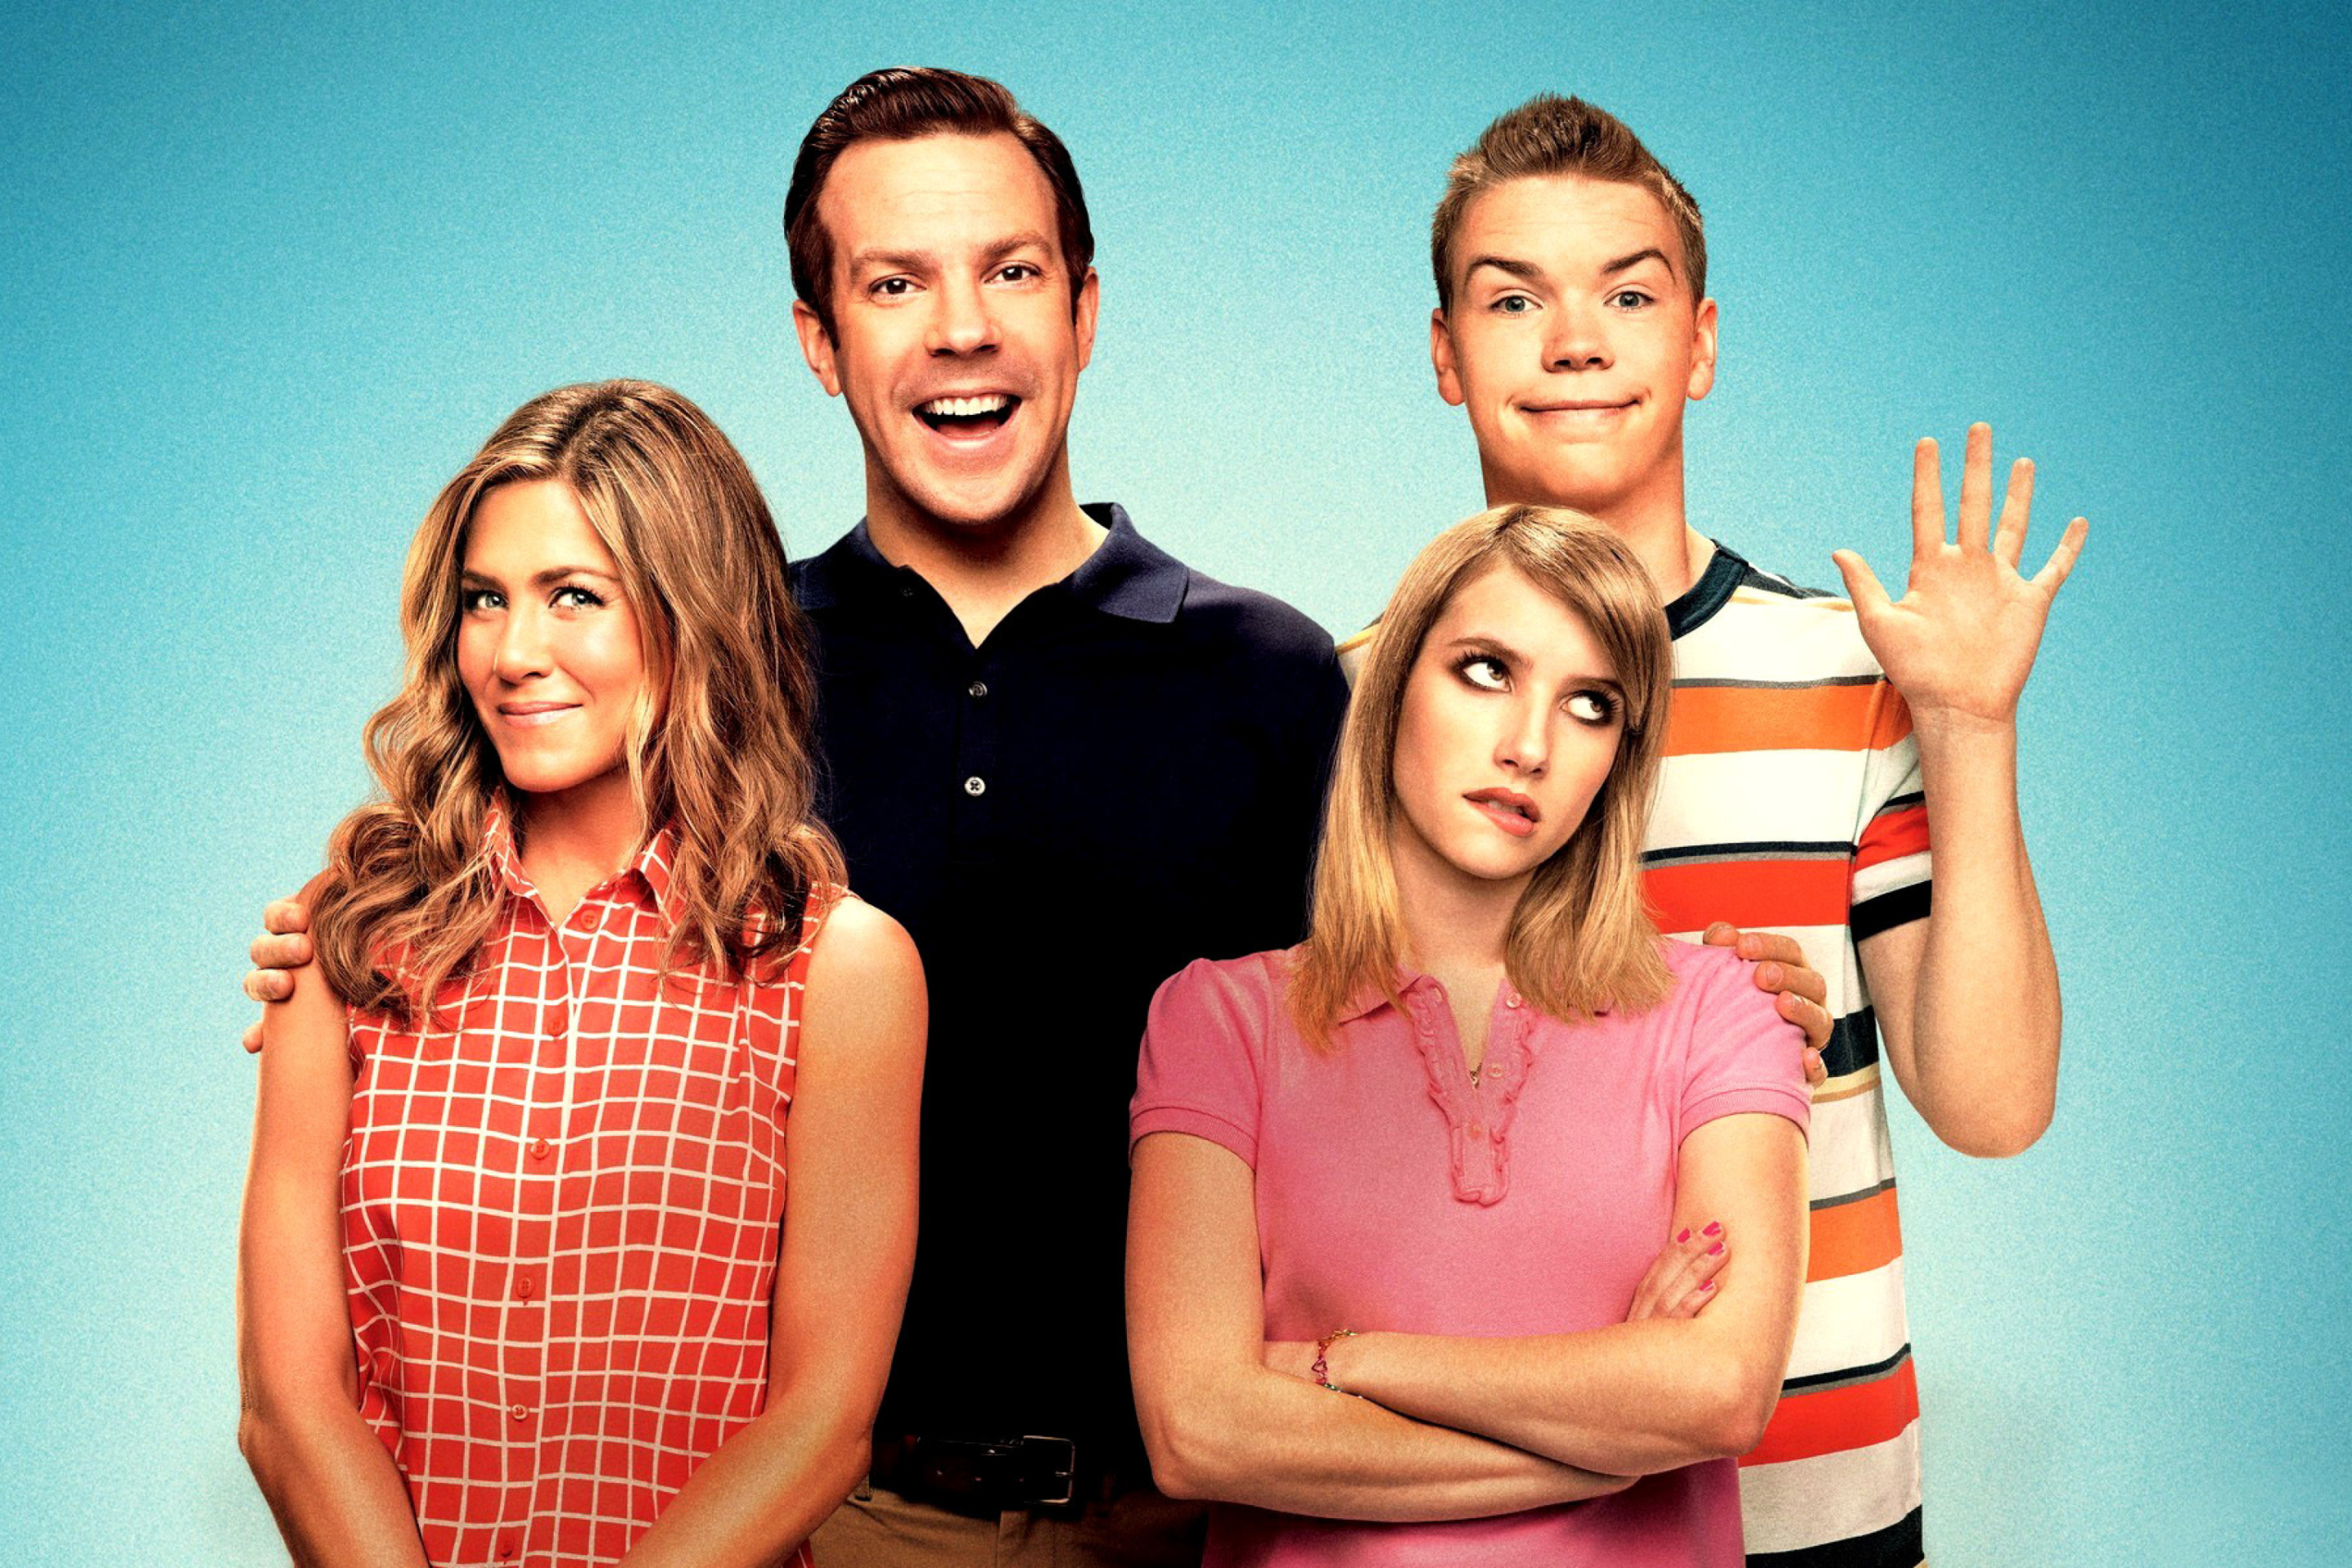 We are the Millers wallpaper 2880x1920